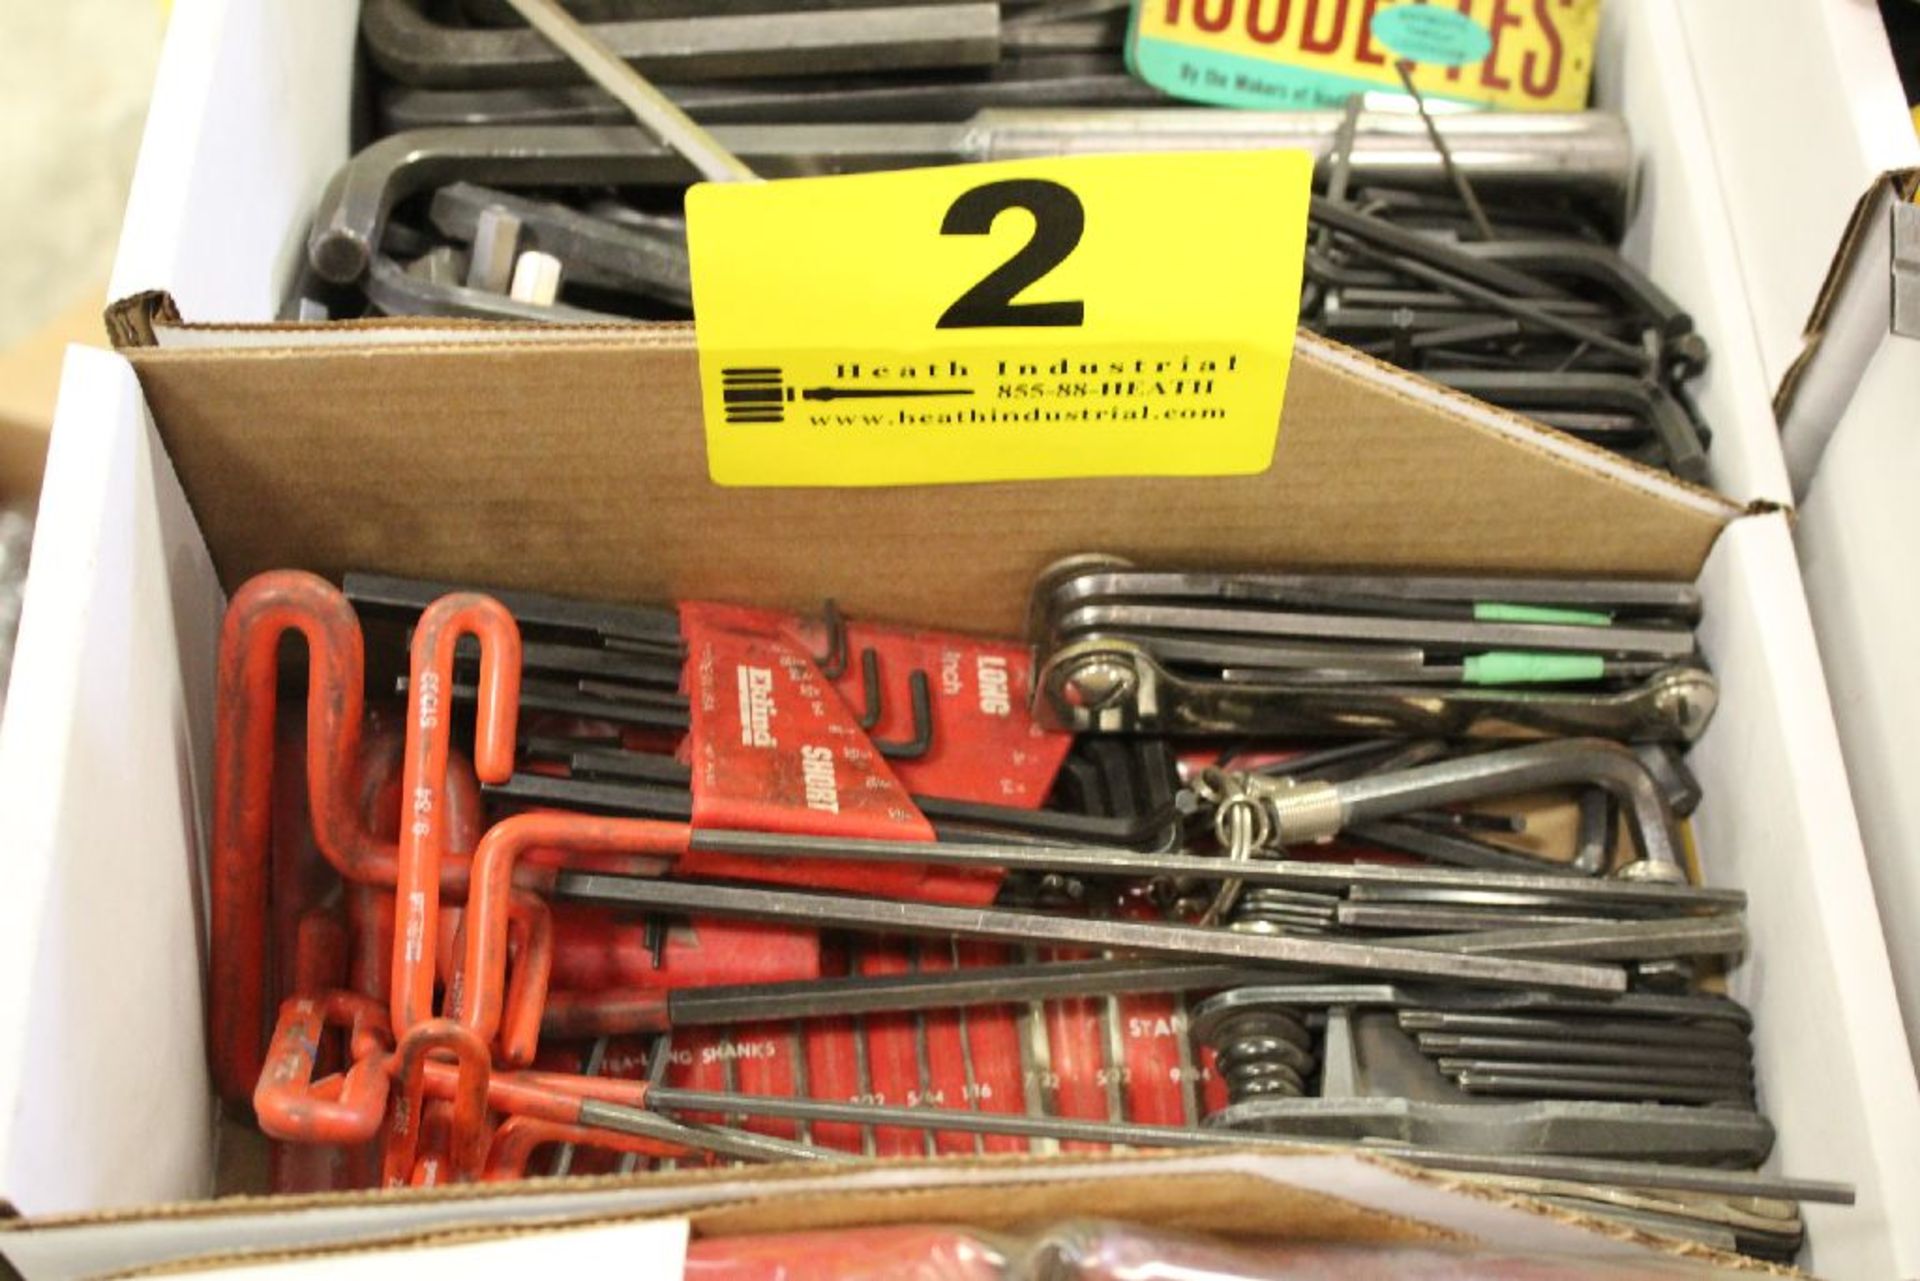 ASSORTED T-HANDLE HEX KEYS IN BOX